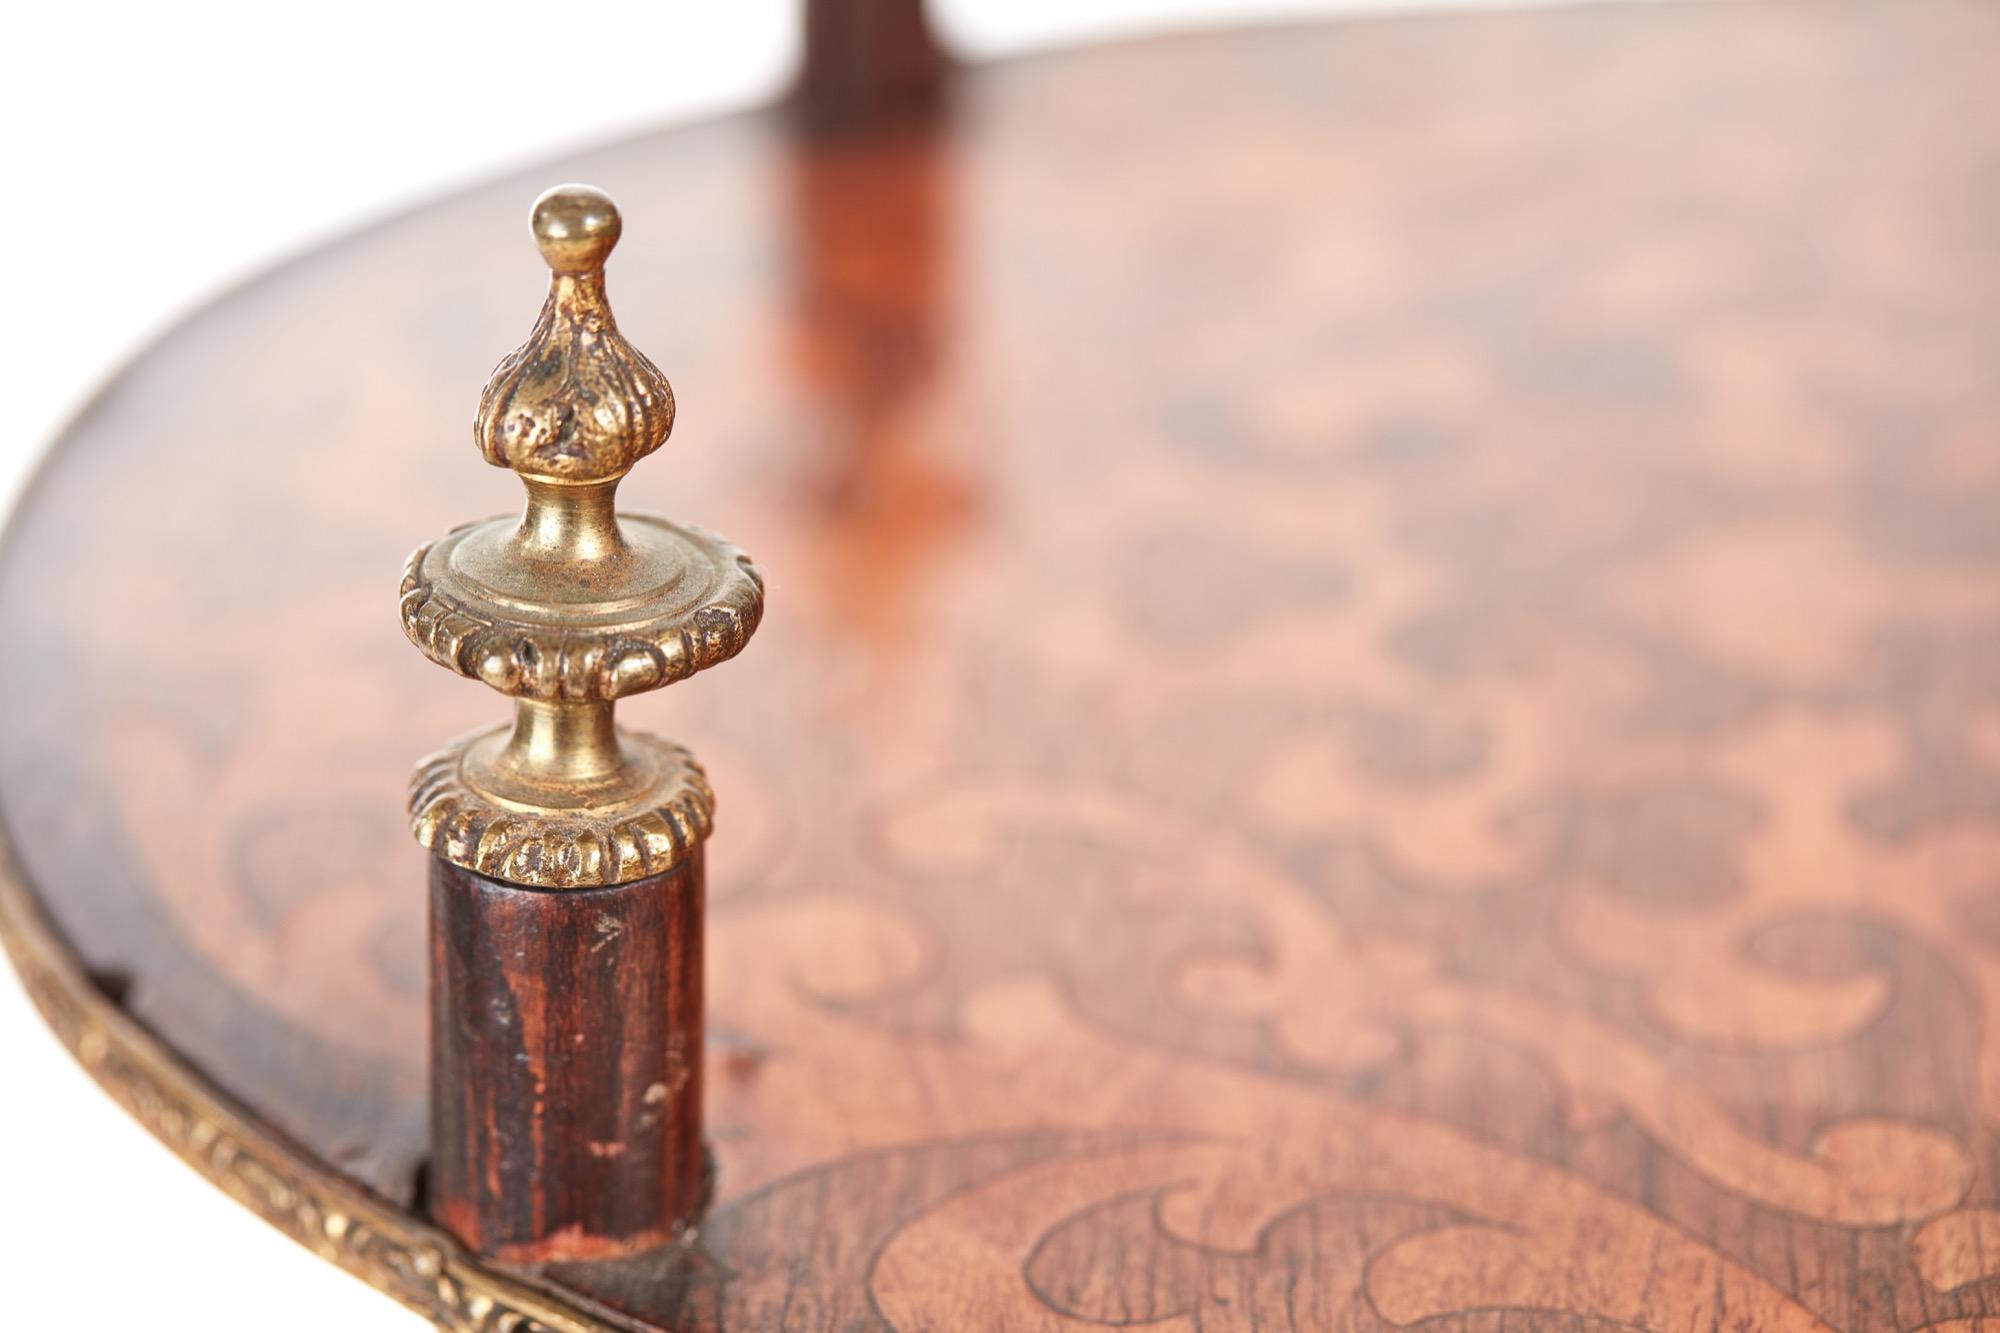 This is a 19th century Victorian antique three tier oval inlaid stand. The three tiers are beautifully and expertly inlaid with kingwood and satinwood with pretty brass band edges. It is supported by four shaped legs with charming ornate brass